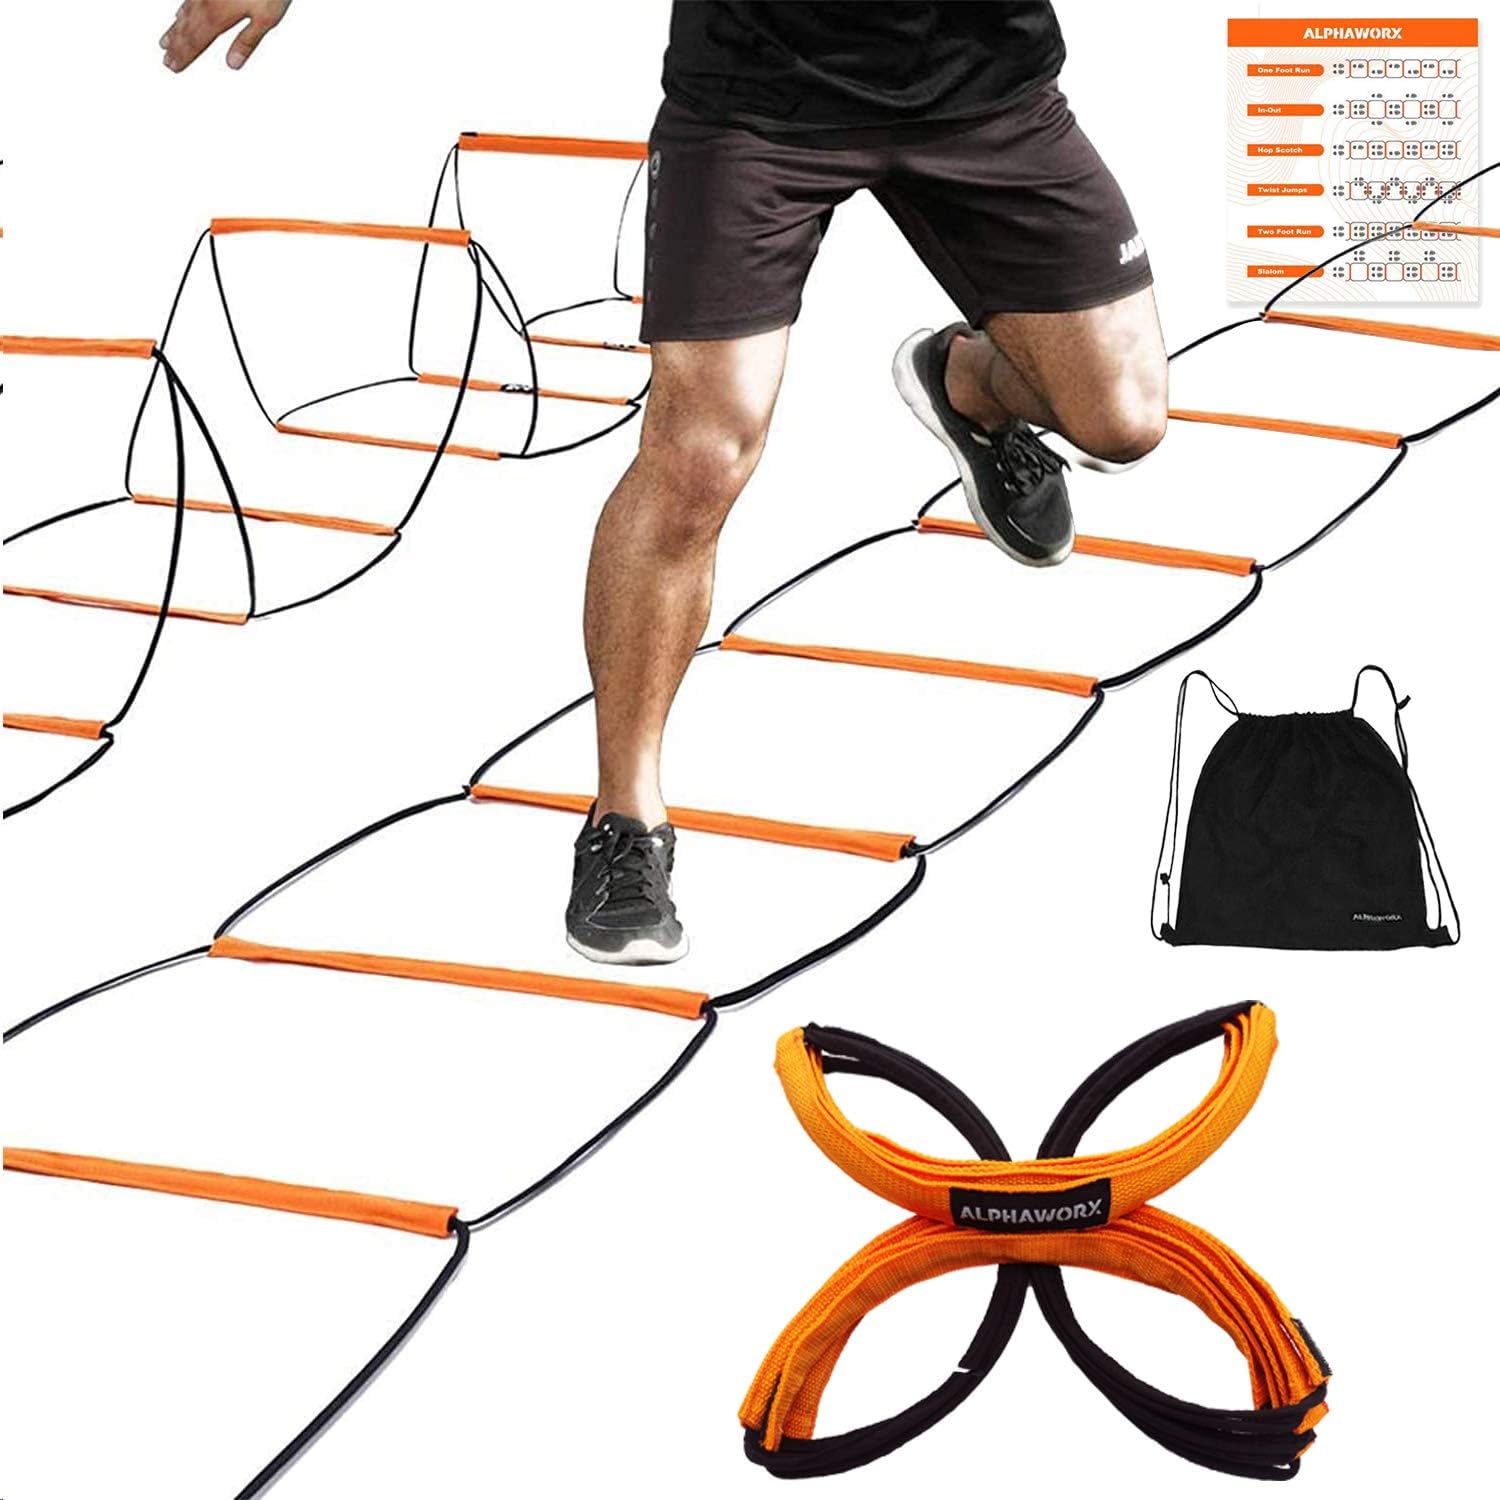 Agility Speed Training Ladder 20 Rung Footwork Fitness Football Workout Exercise 